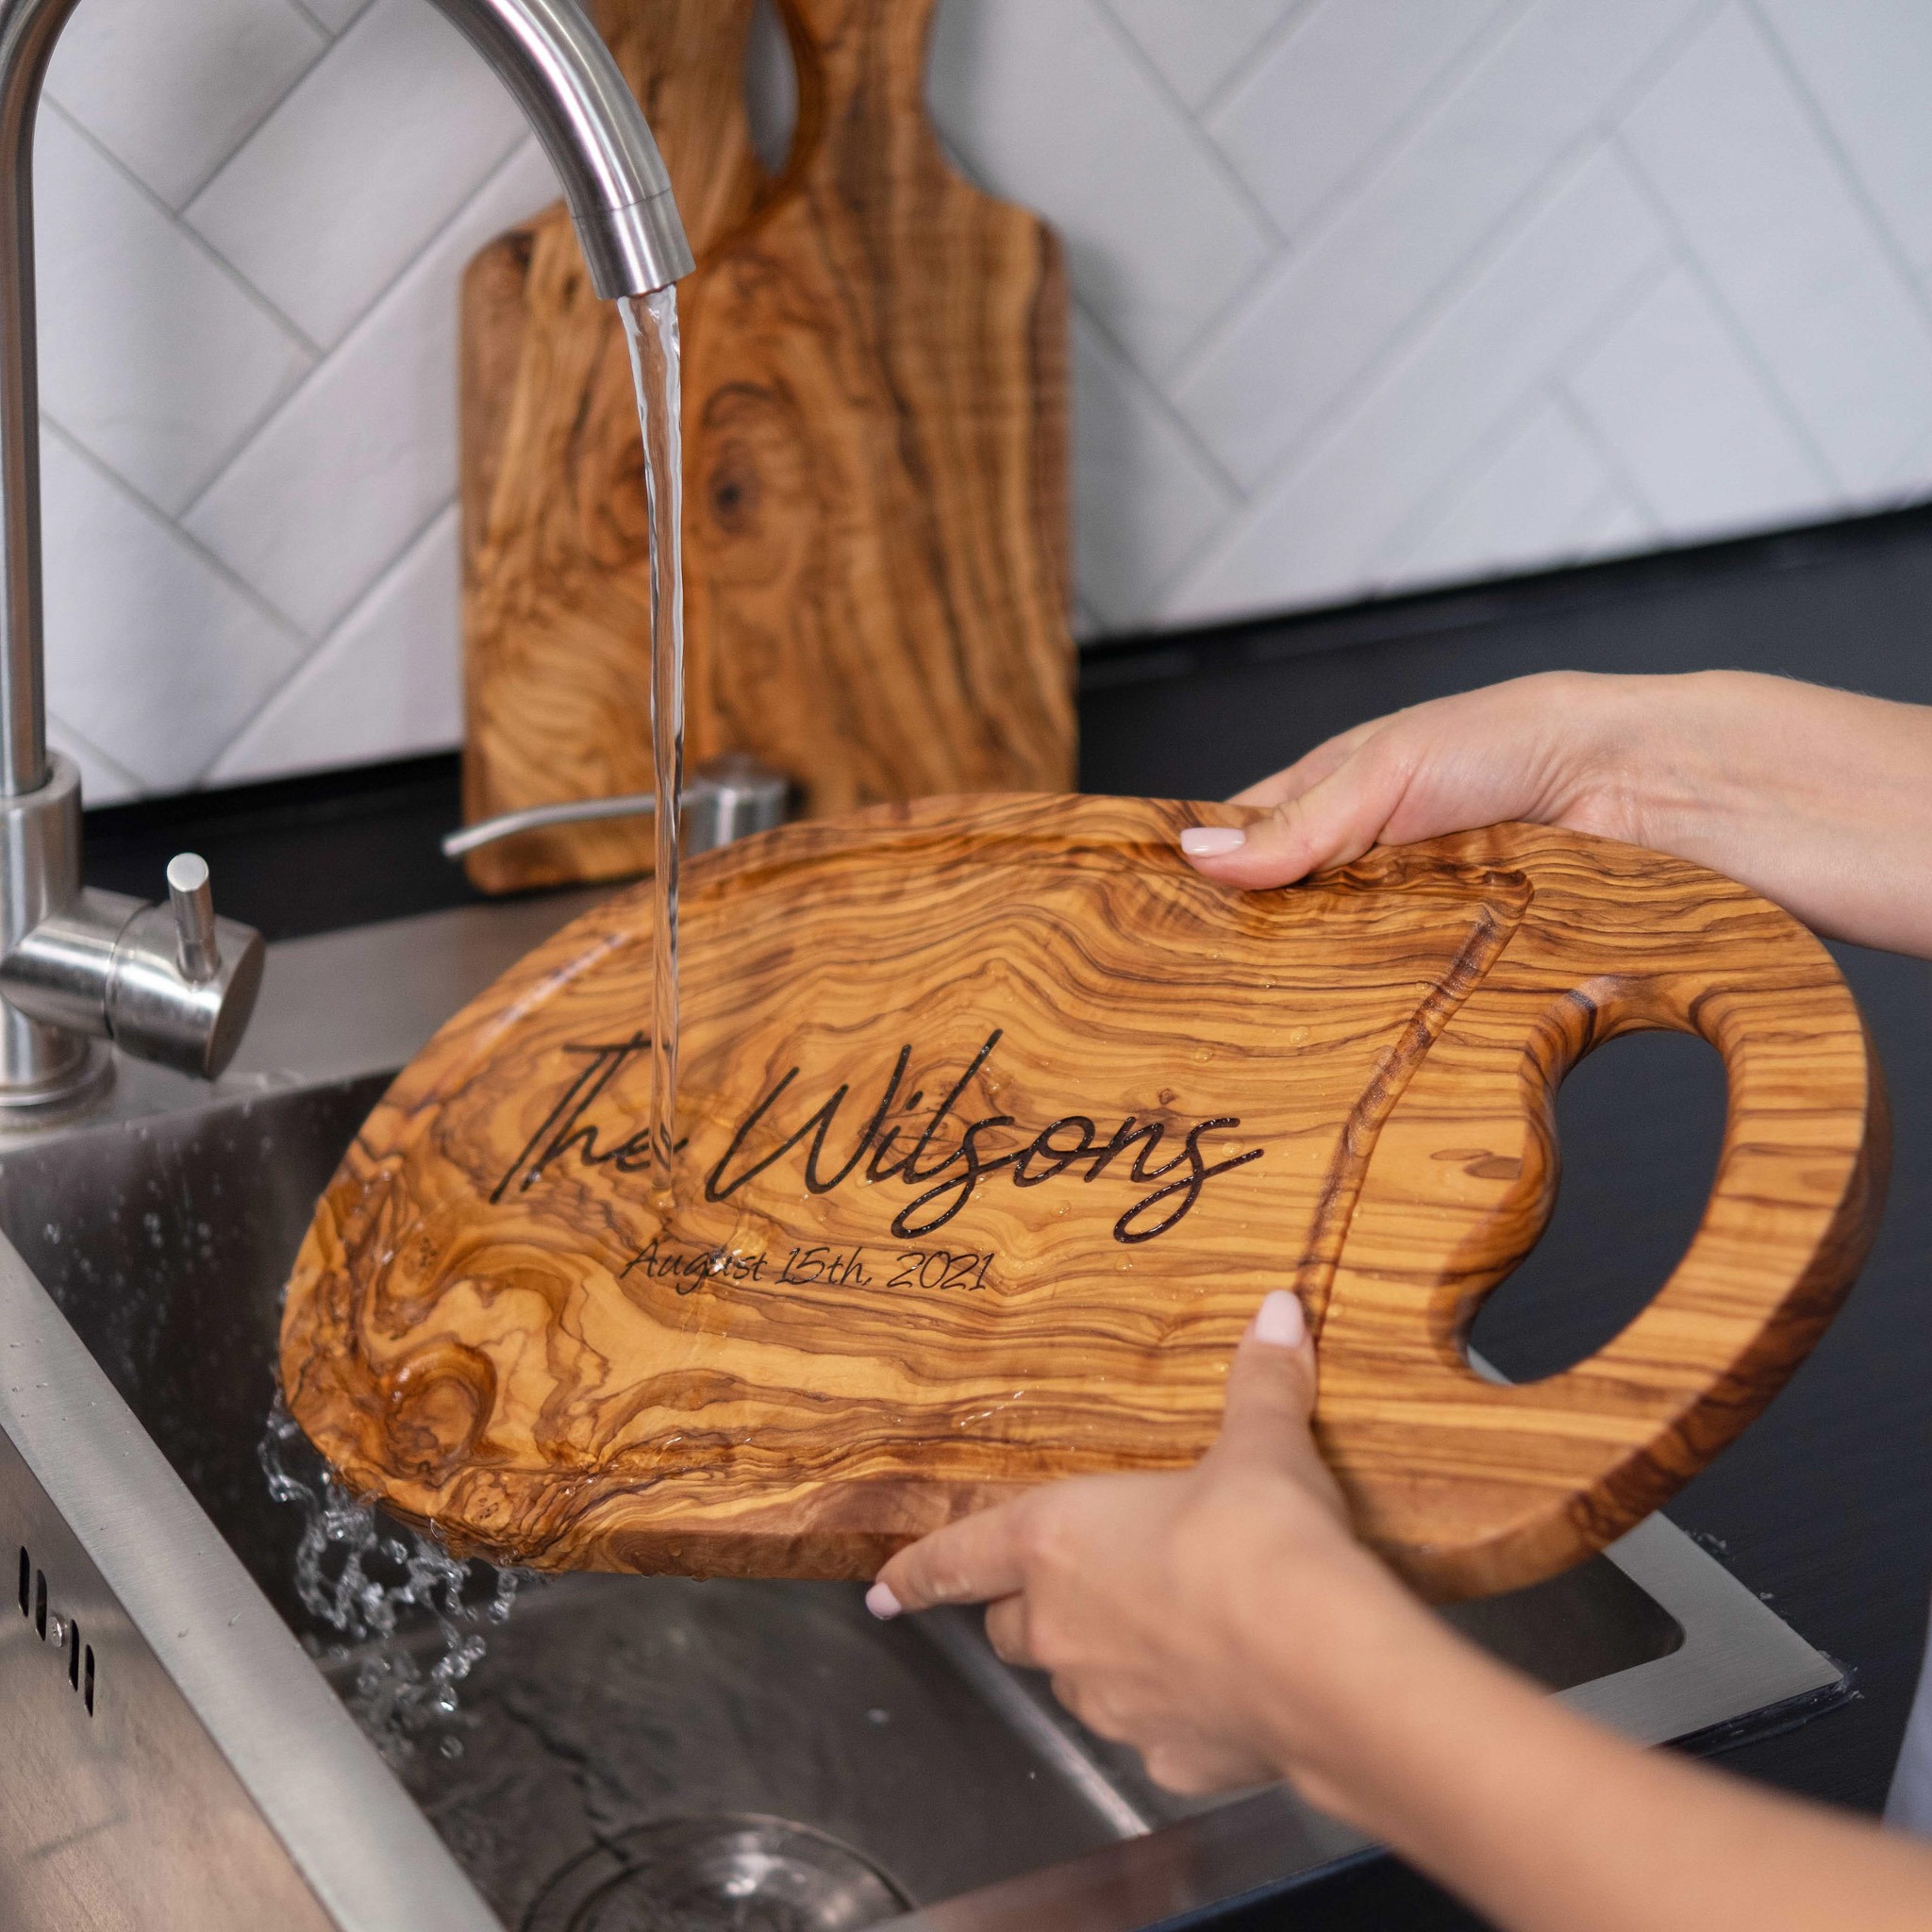 How to make a hand lettered cutting board - Cassie Bustamante